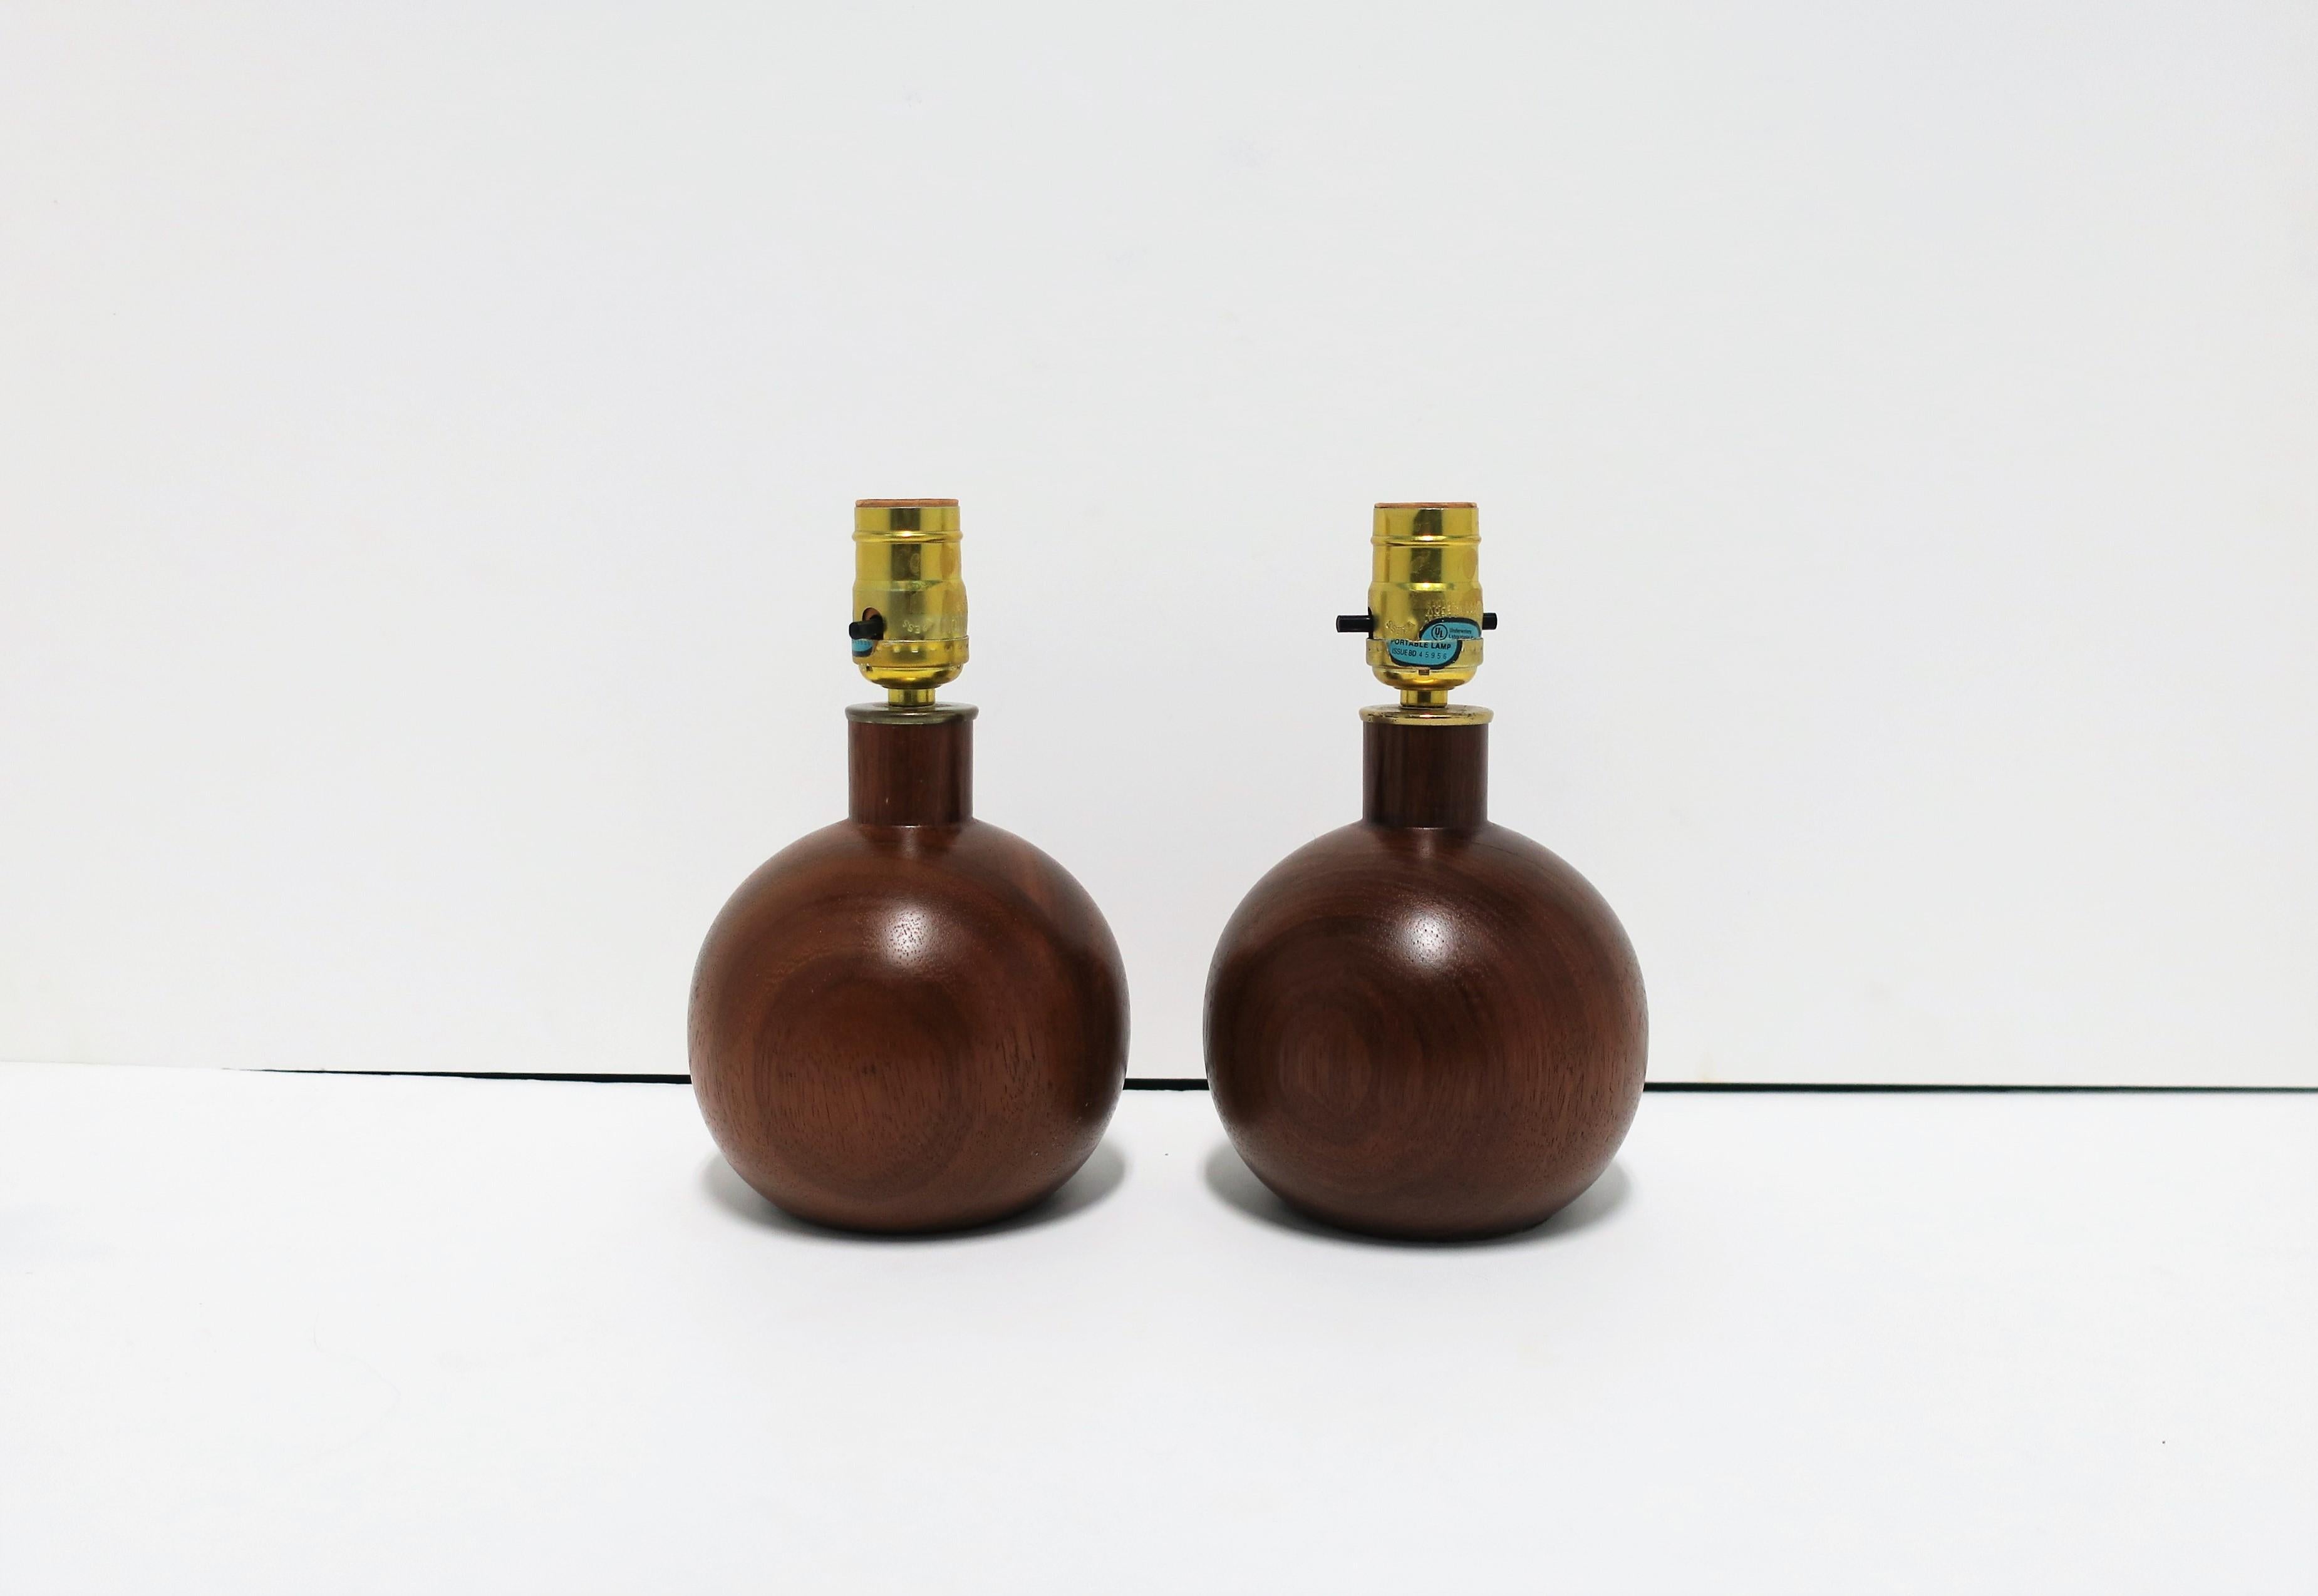 Listing/selling as a pair, but willing to split upon request. 

A small pair of modern wood and brass round ball sphere desk or table lamps, circa 1960s-1970s. Lamps may be great for nightstand tables, walk-in-closet, fireplace mantle, vanity, etc.;